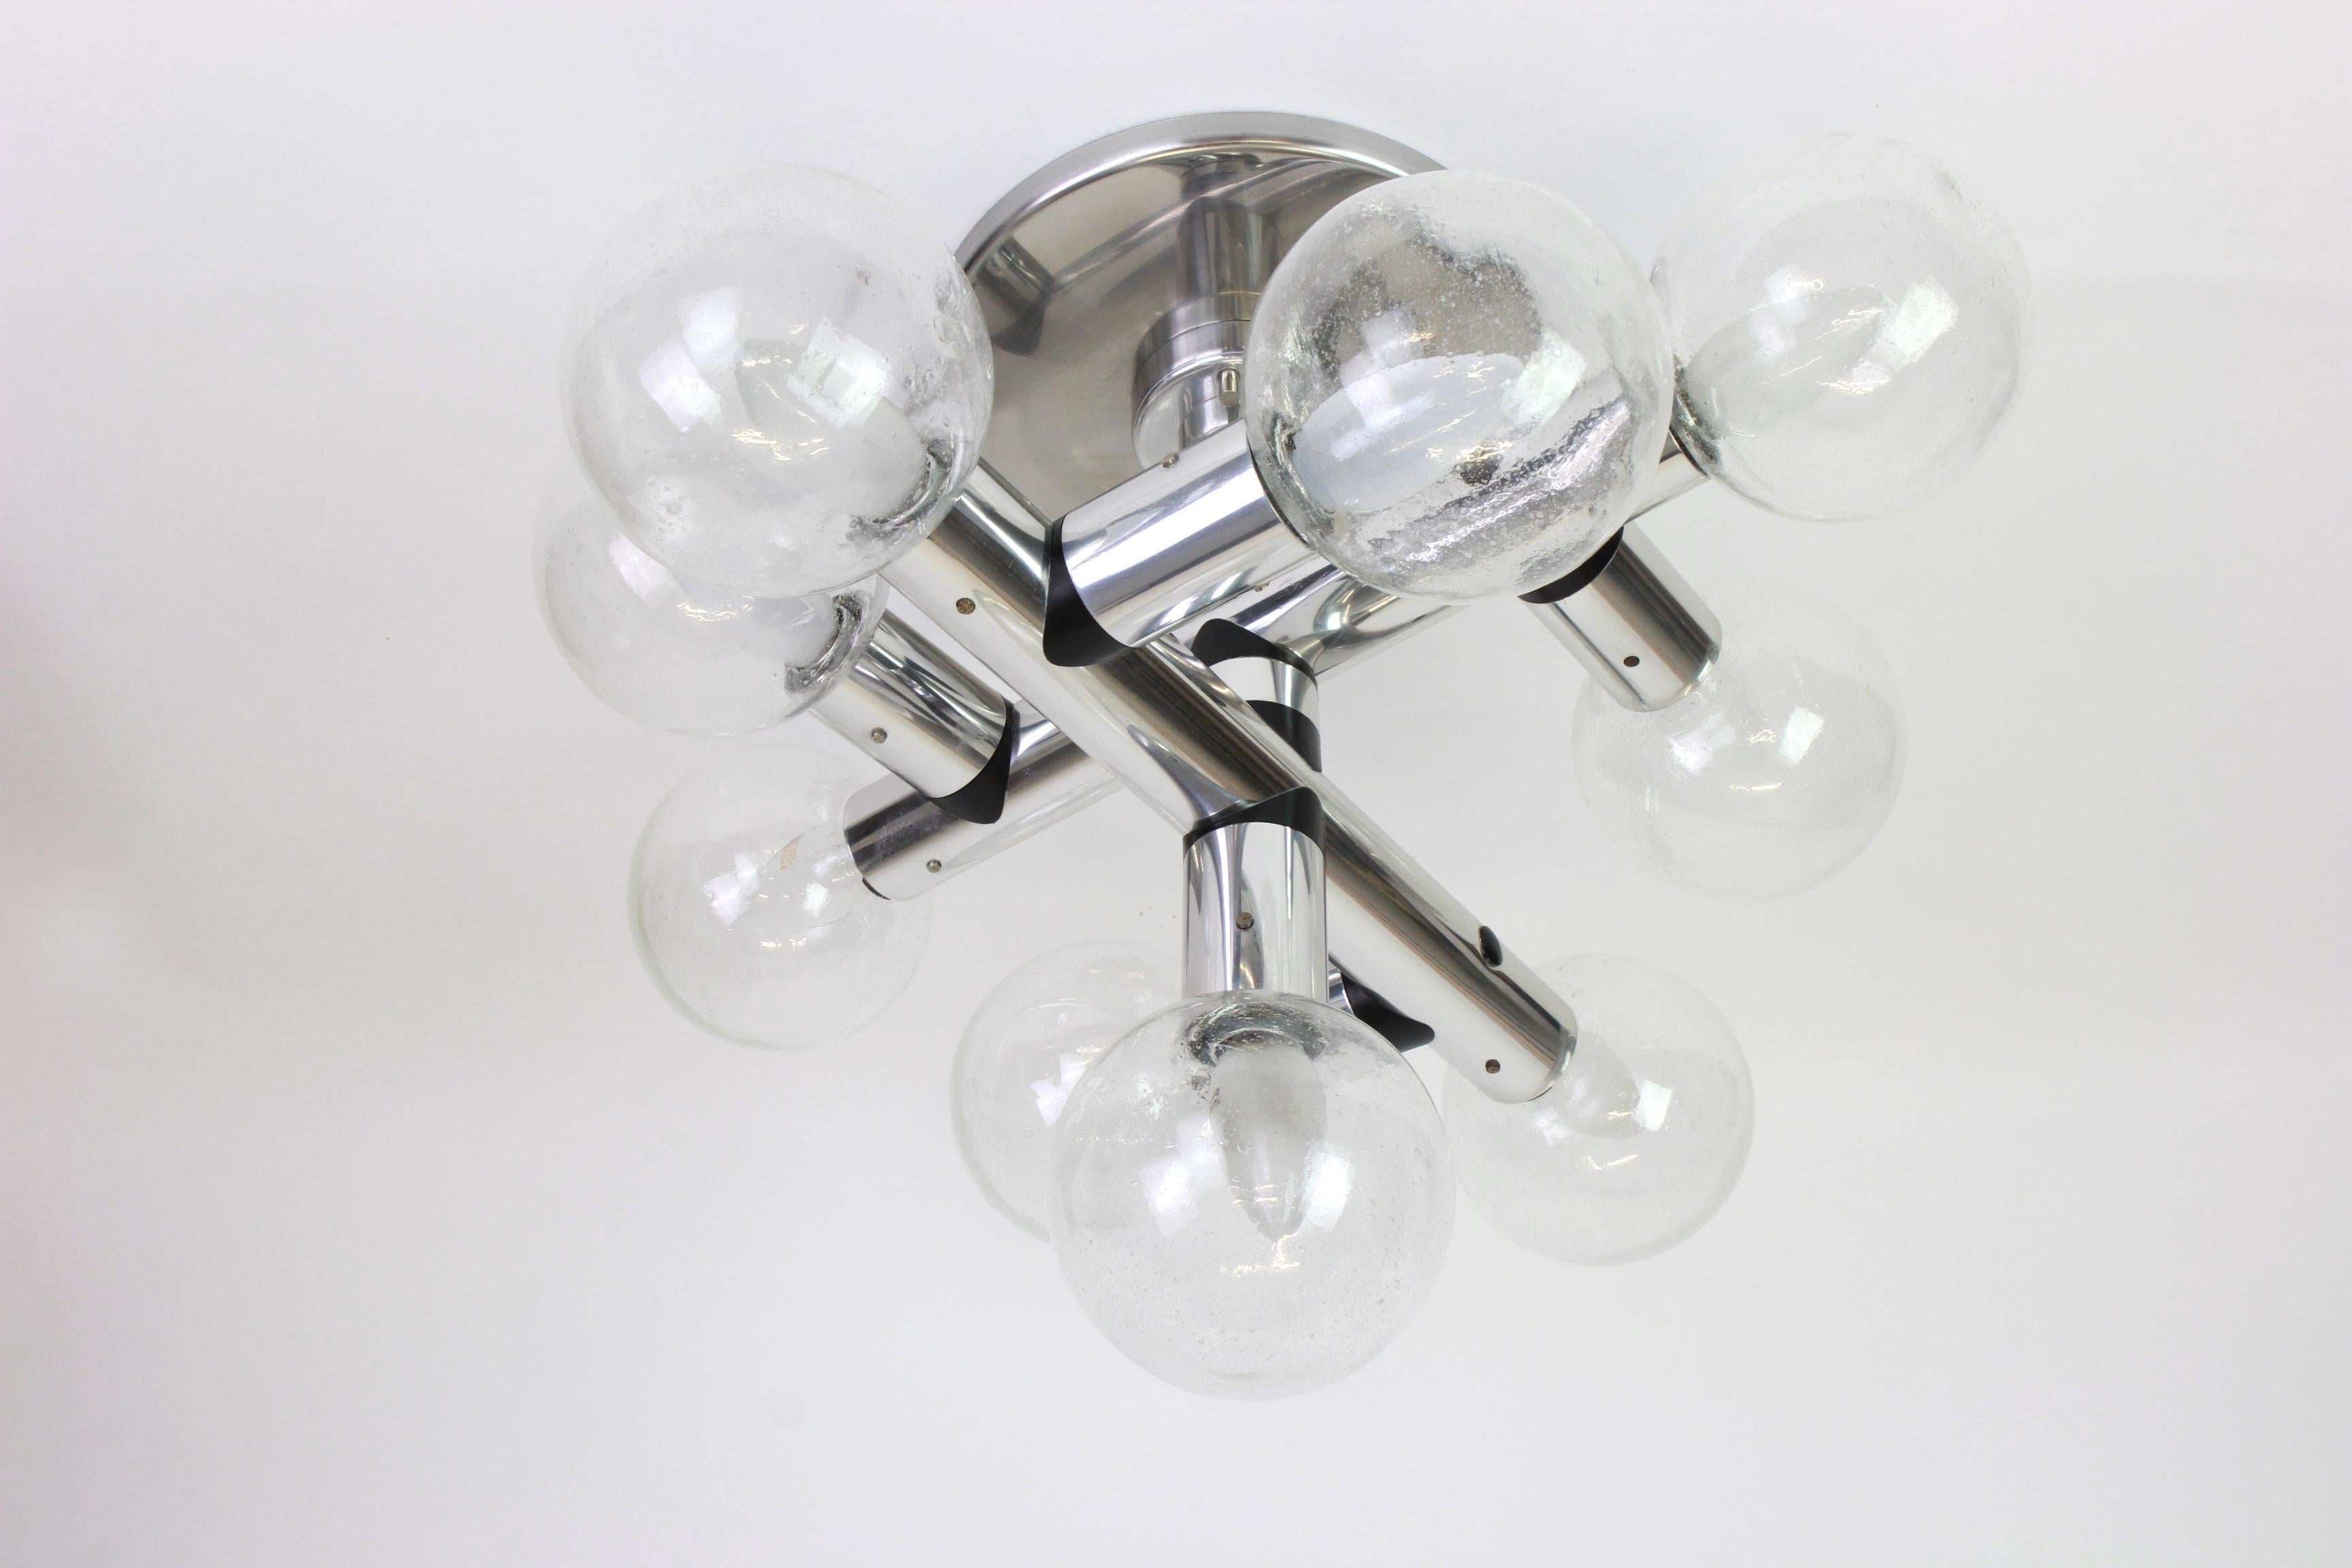 Exclusive sputnik light fixture designed by Kalmar during the 1970s with nine bubble glass ball on an Alu frame.

Heavy quality and in very good condition. Cleaned, well-wired and ready to use.

 The fixture requires nine E14 small bulbs with